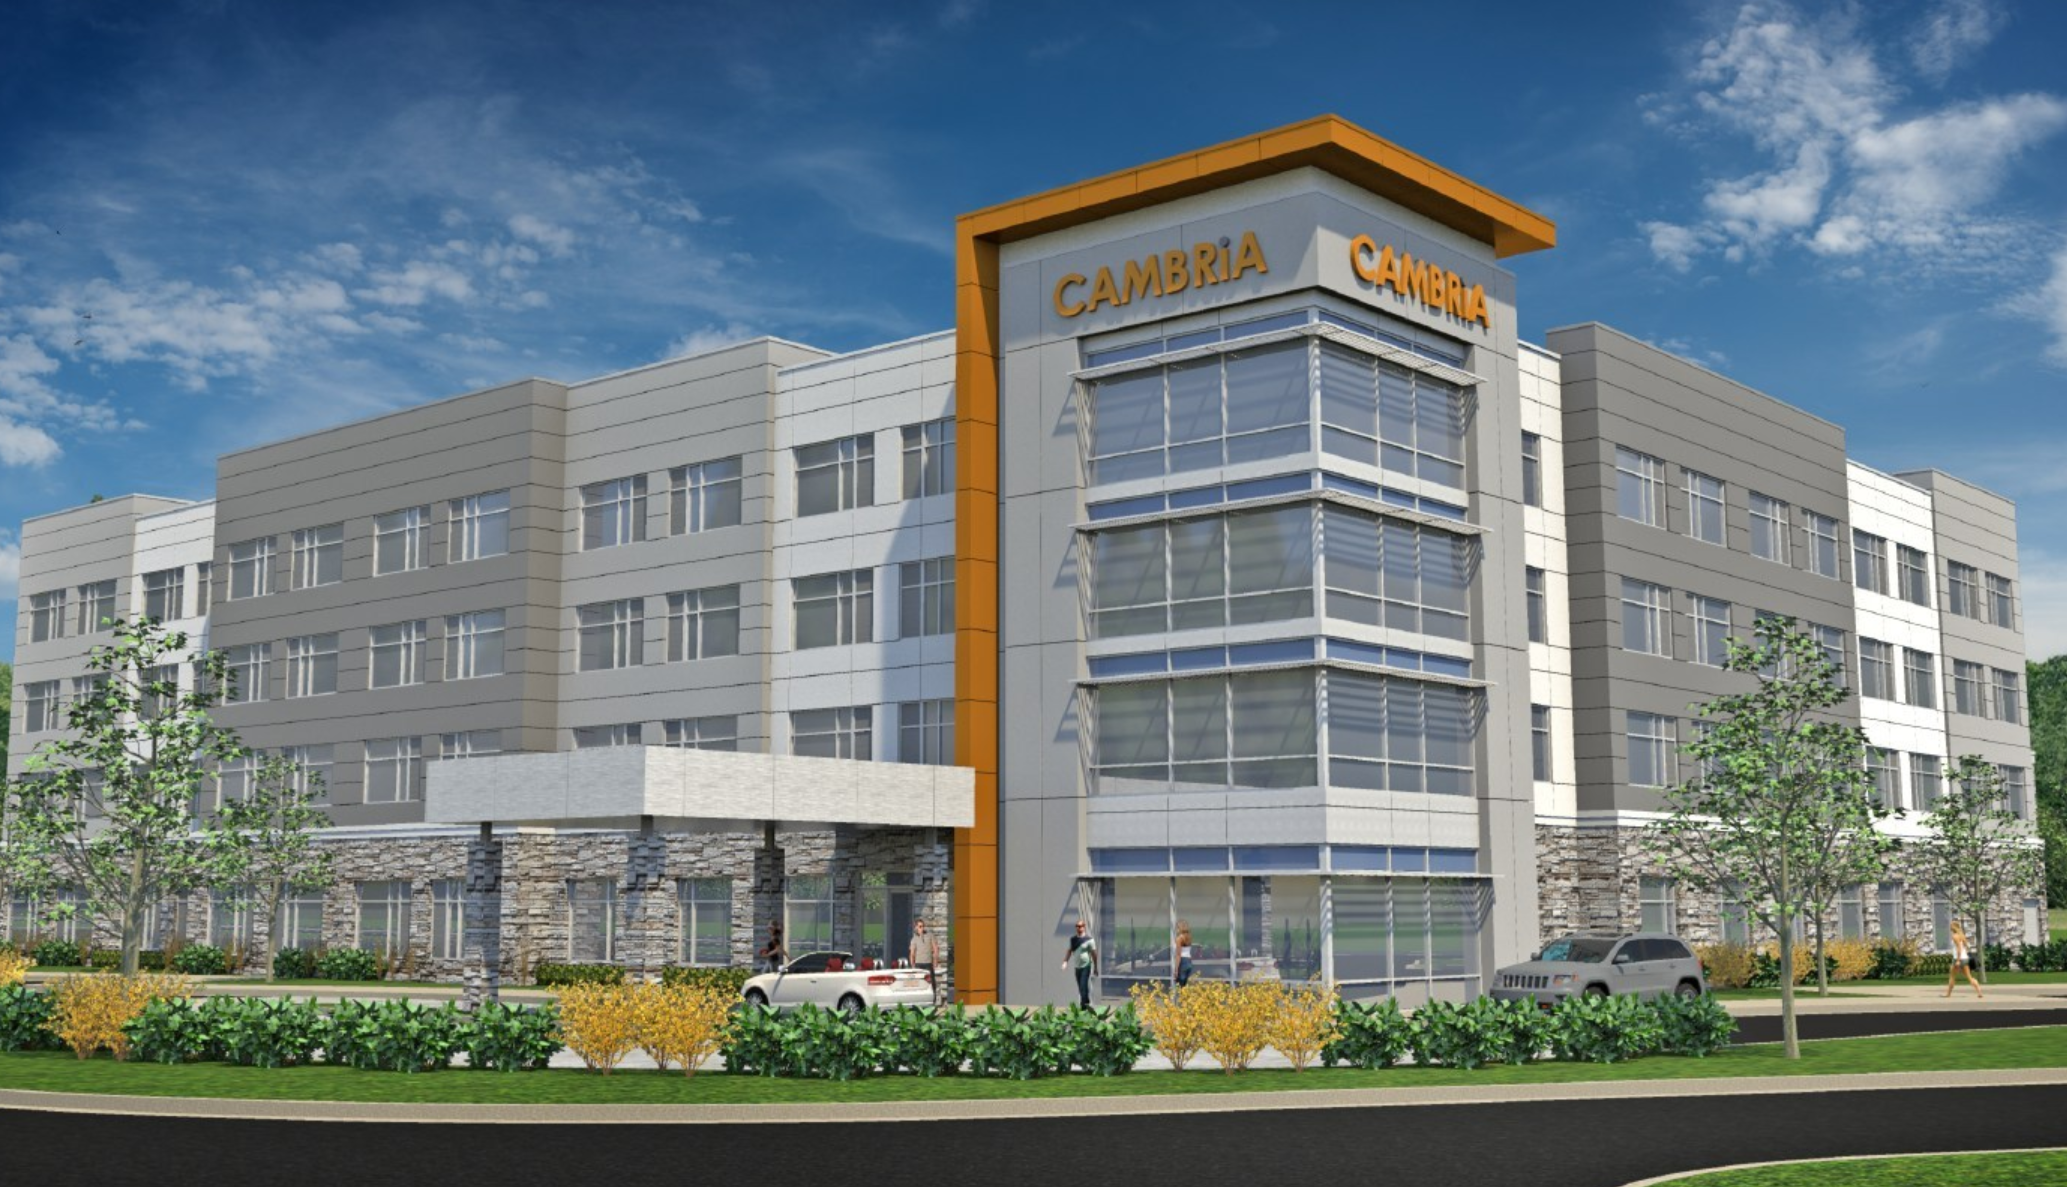 The 125-room Cambria Hotel Greenville and the 95-room Cambria Hotel Summerville are both slated to open in October 2019